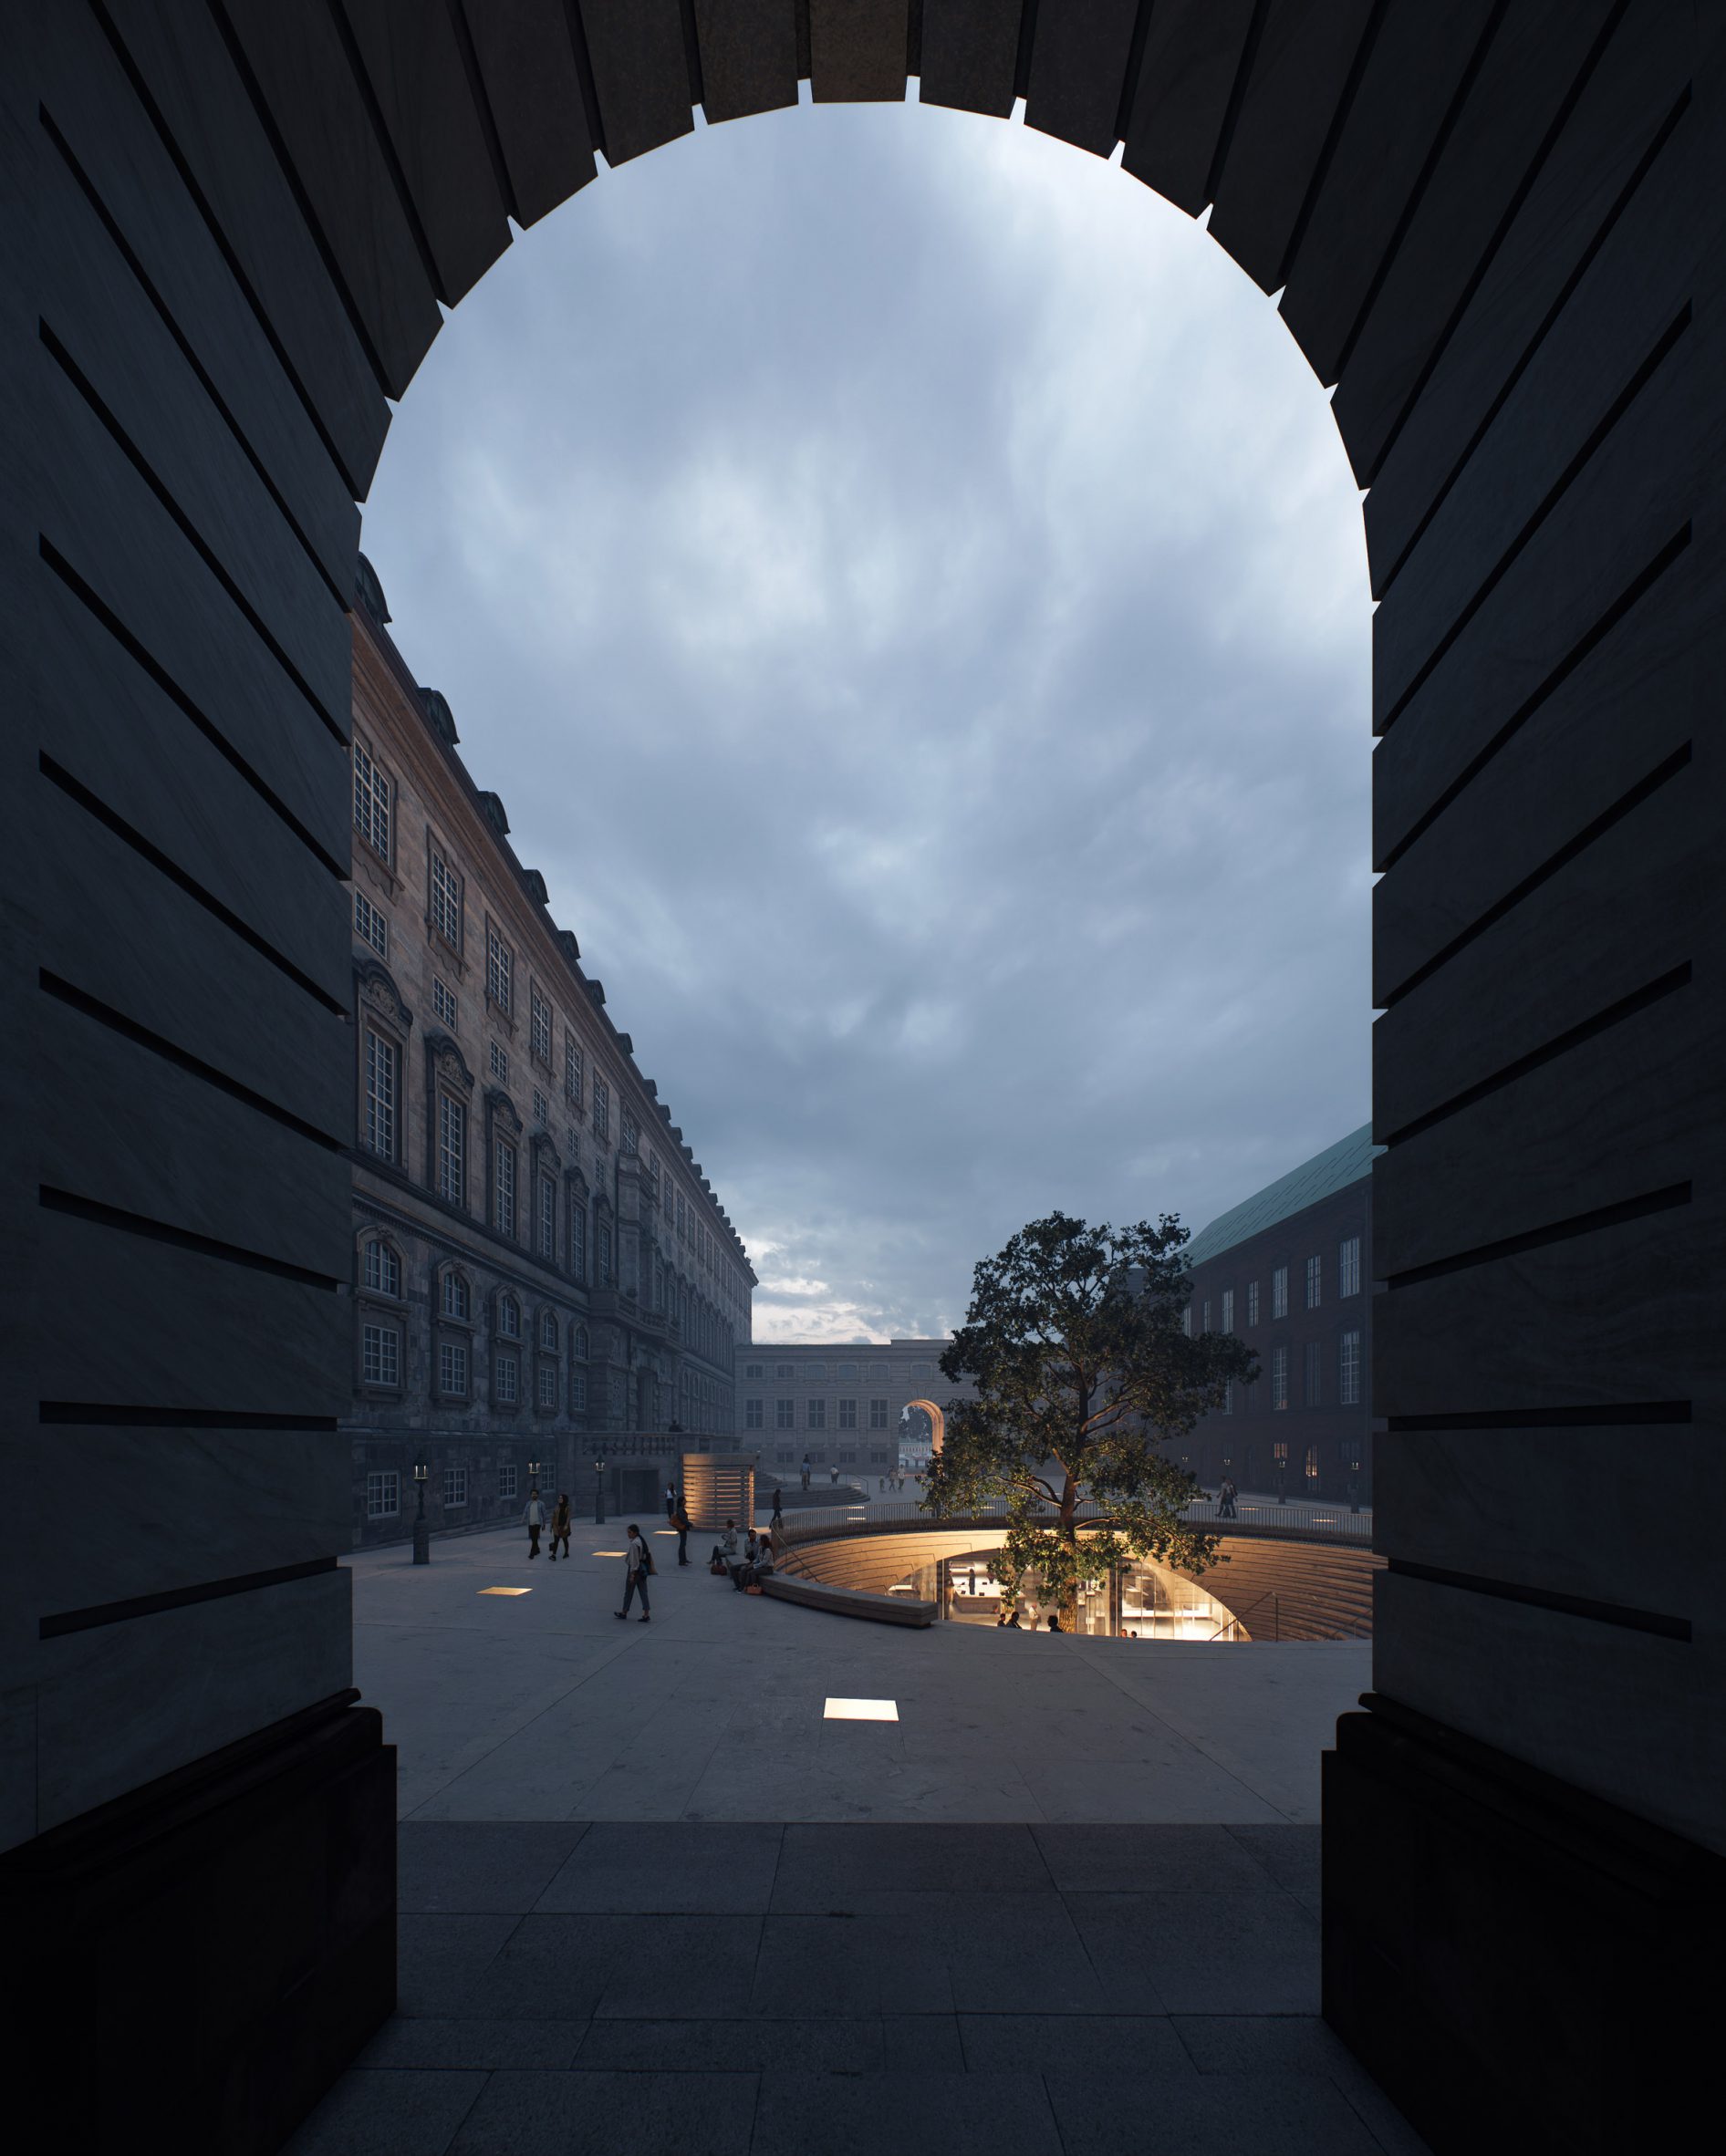 Entrance to the Danish Parliament courtyard